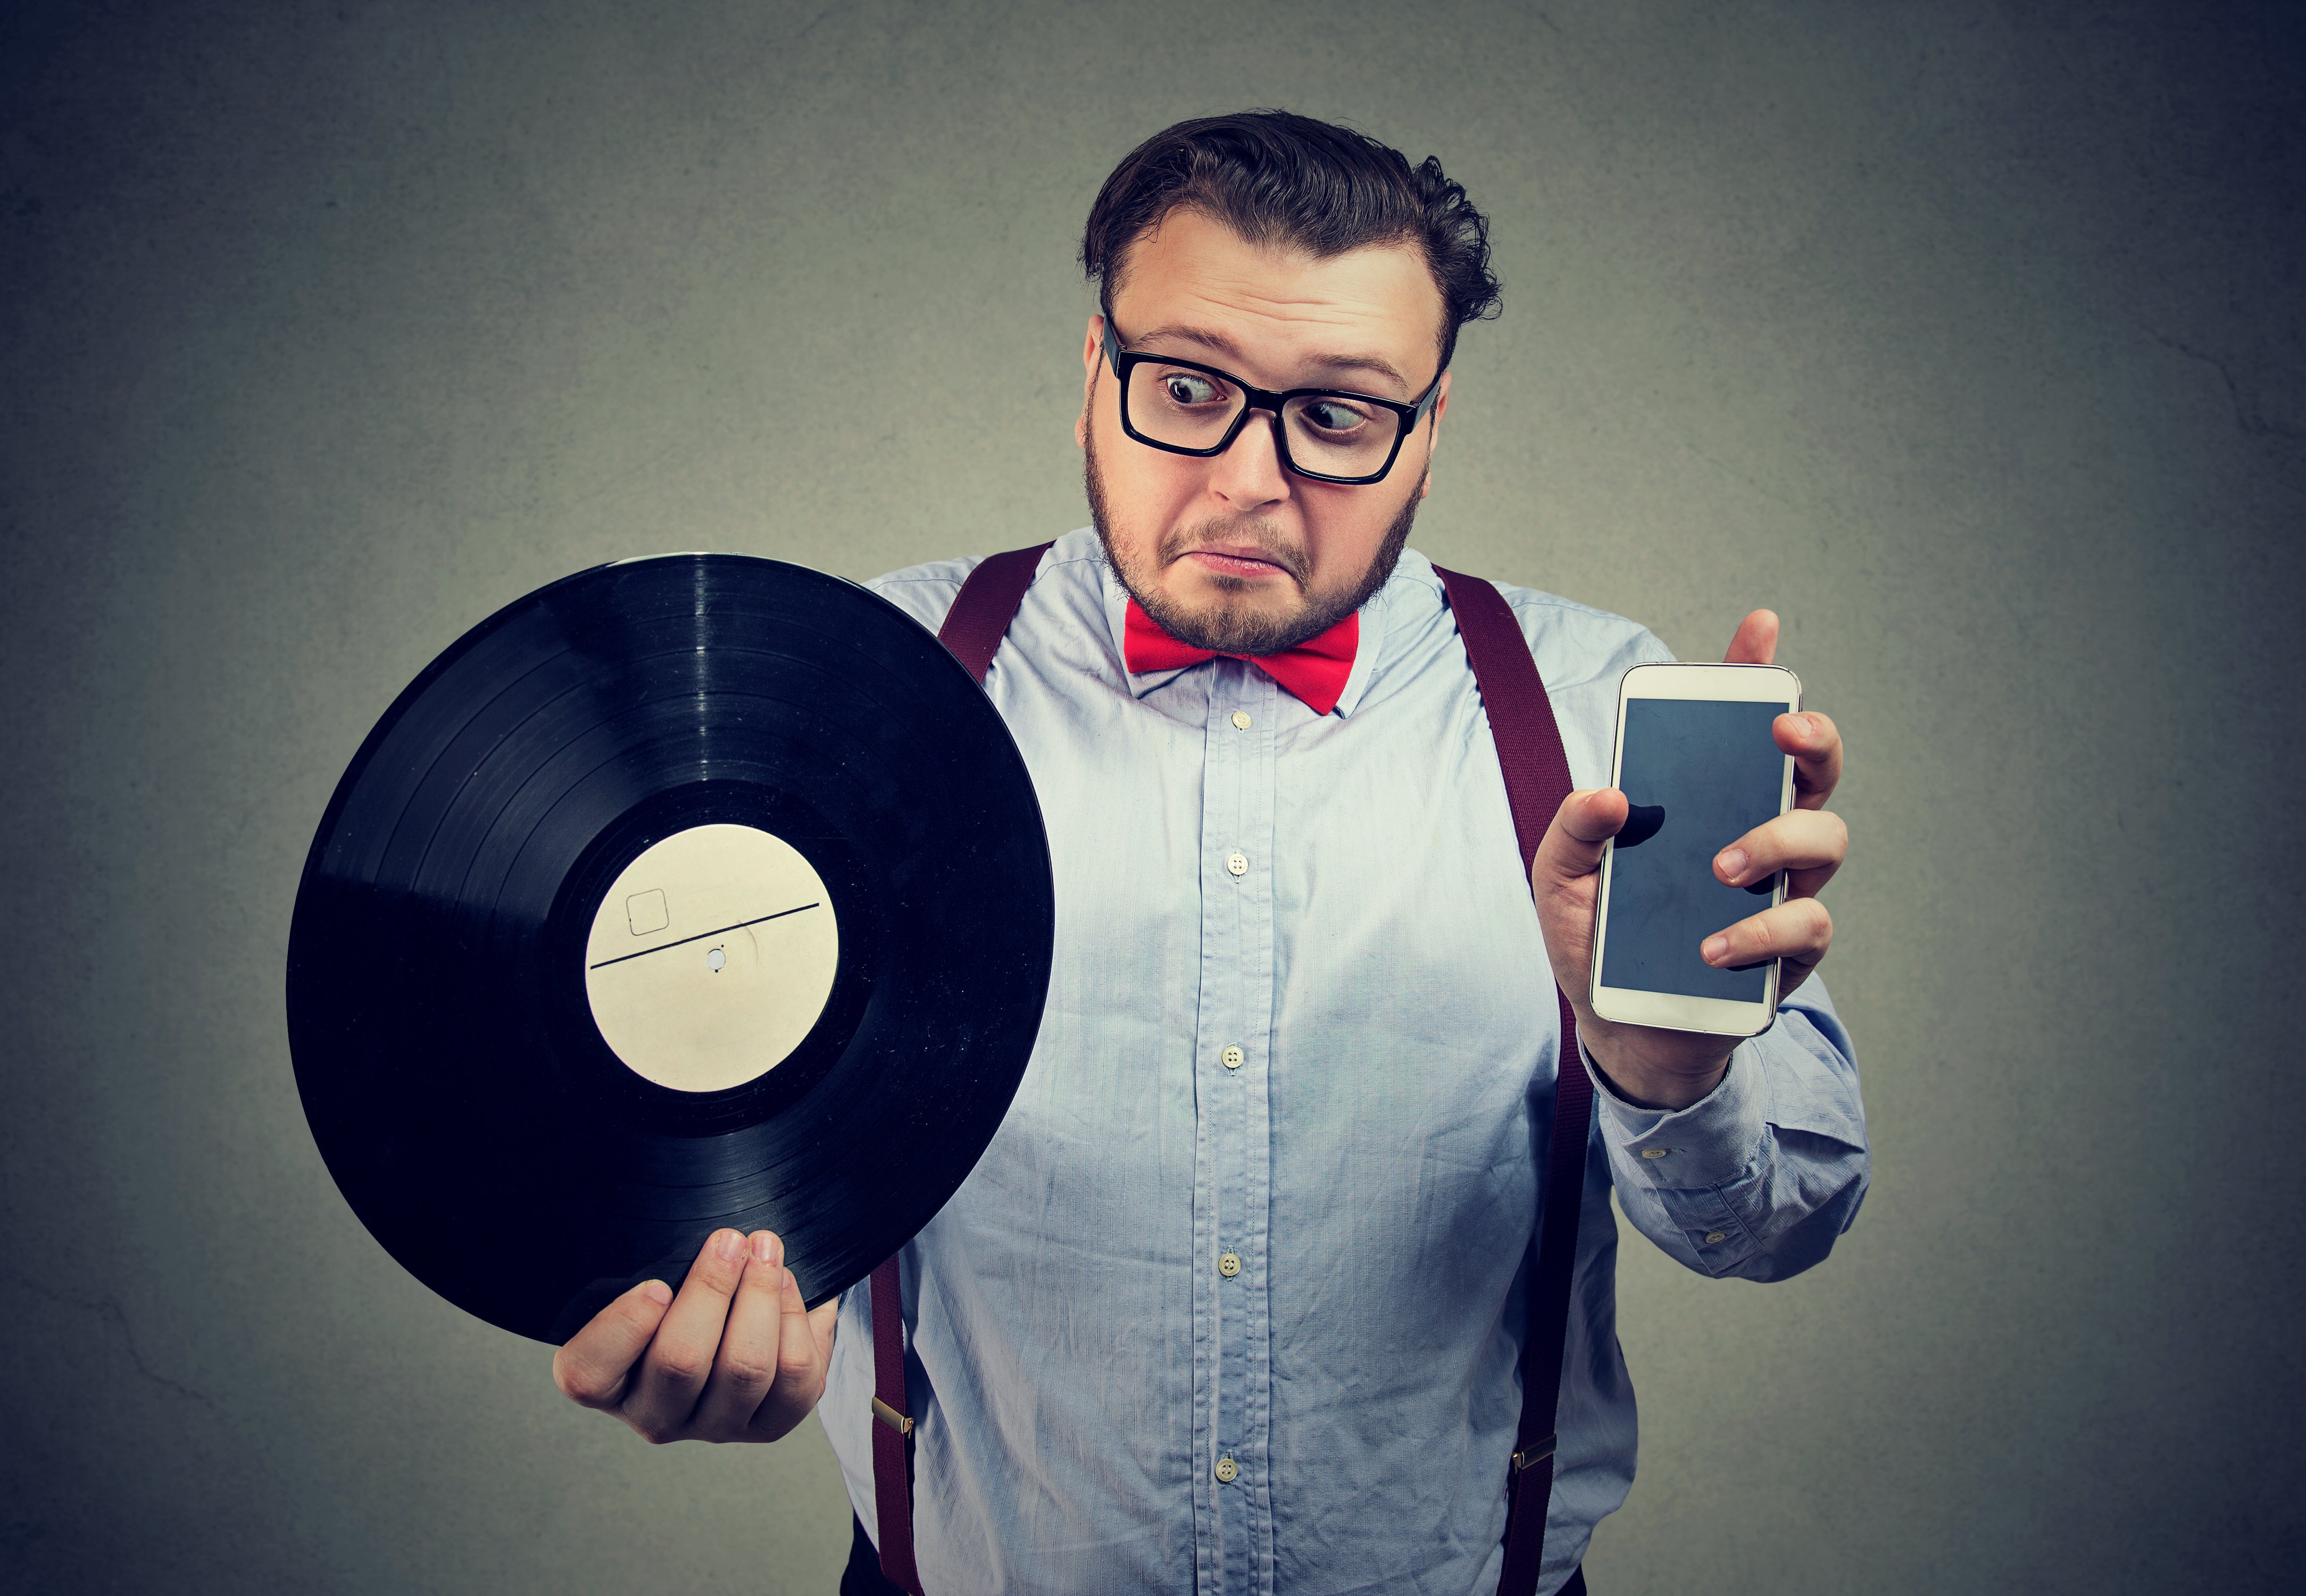 Man holding vinyl record and smartphone comparing old and new.